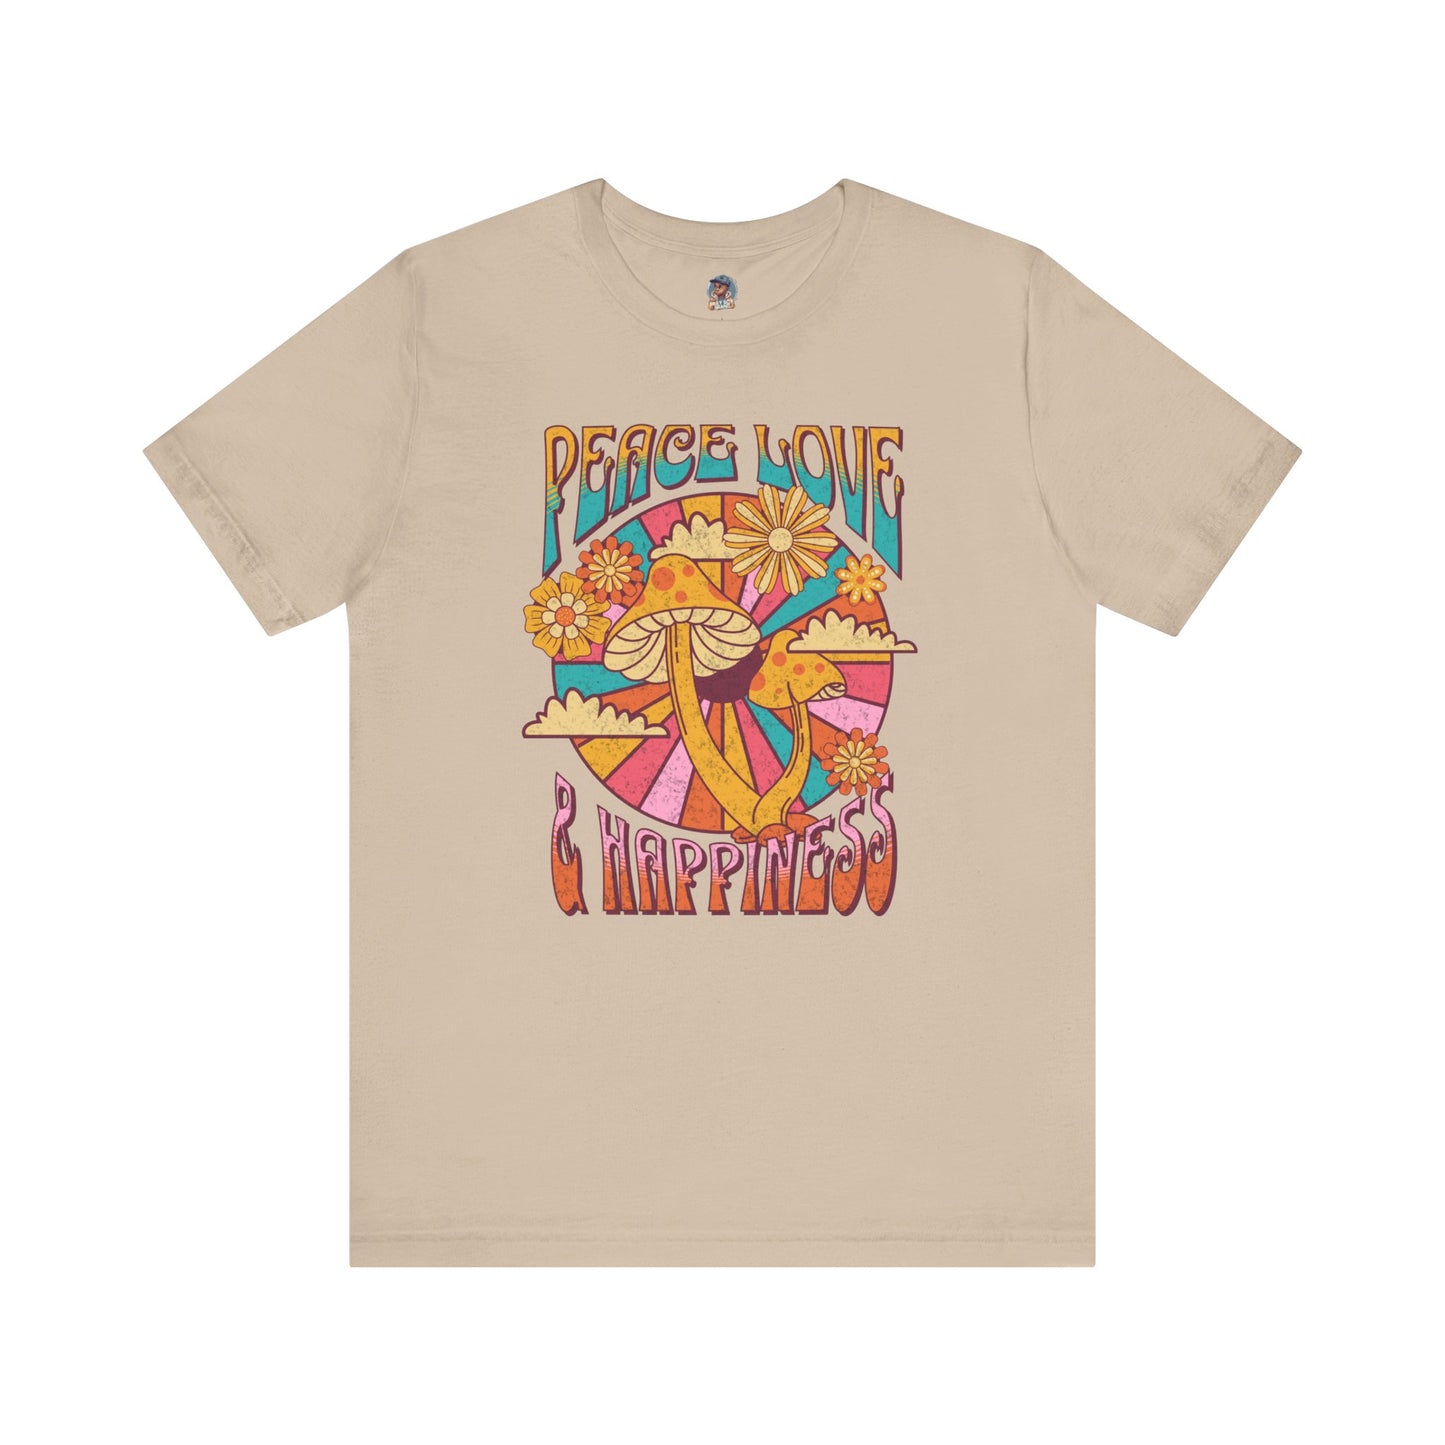 "Peace Love & Happiness T-shirt"